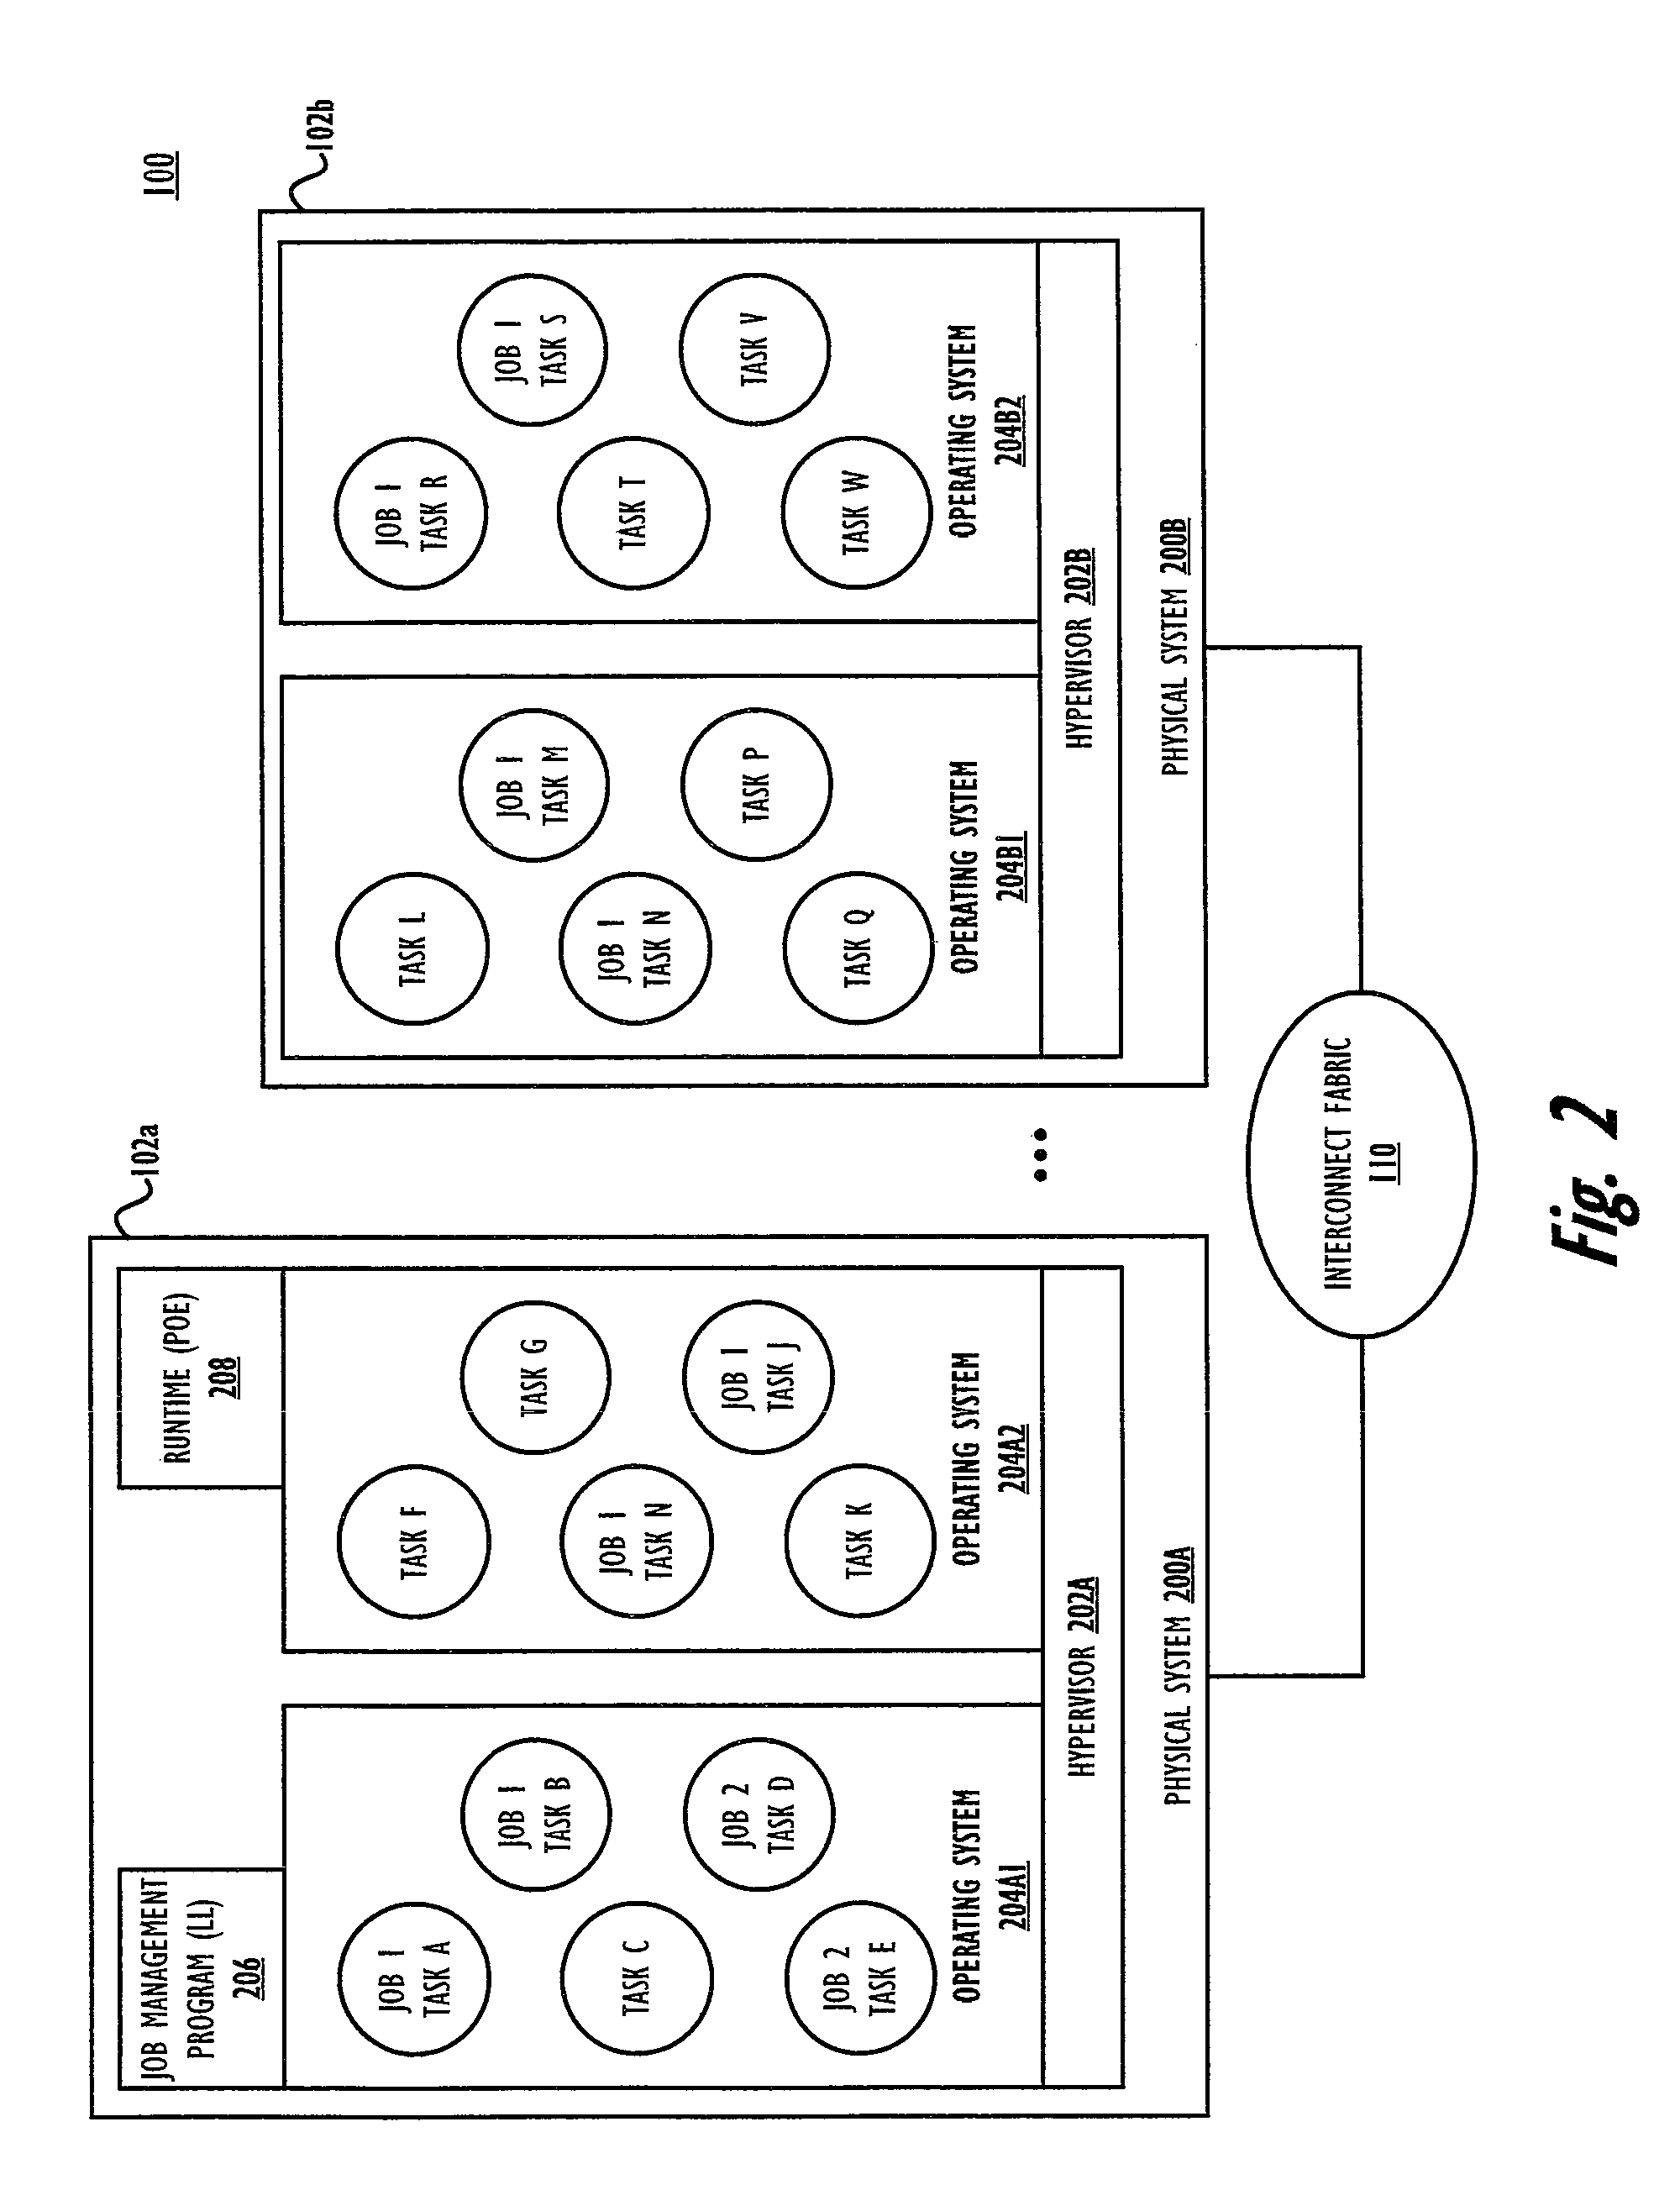 Issuing global shared memory operations via direct cache injection to a host fabric interface